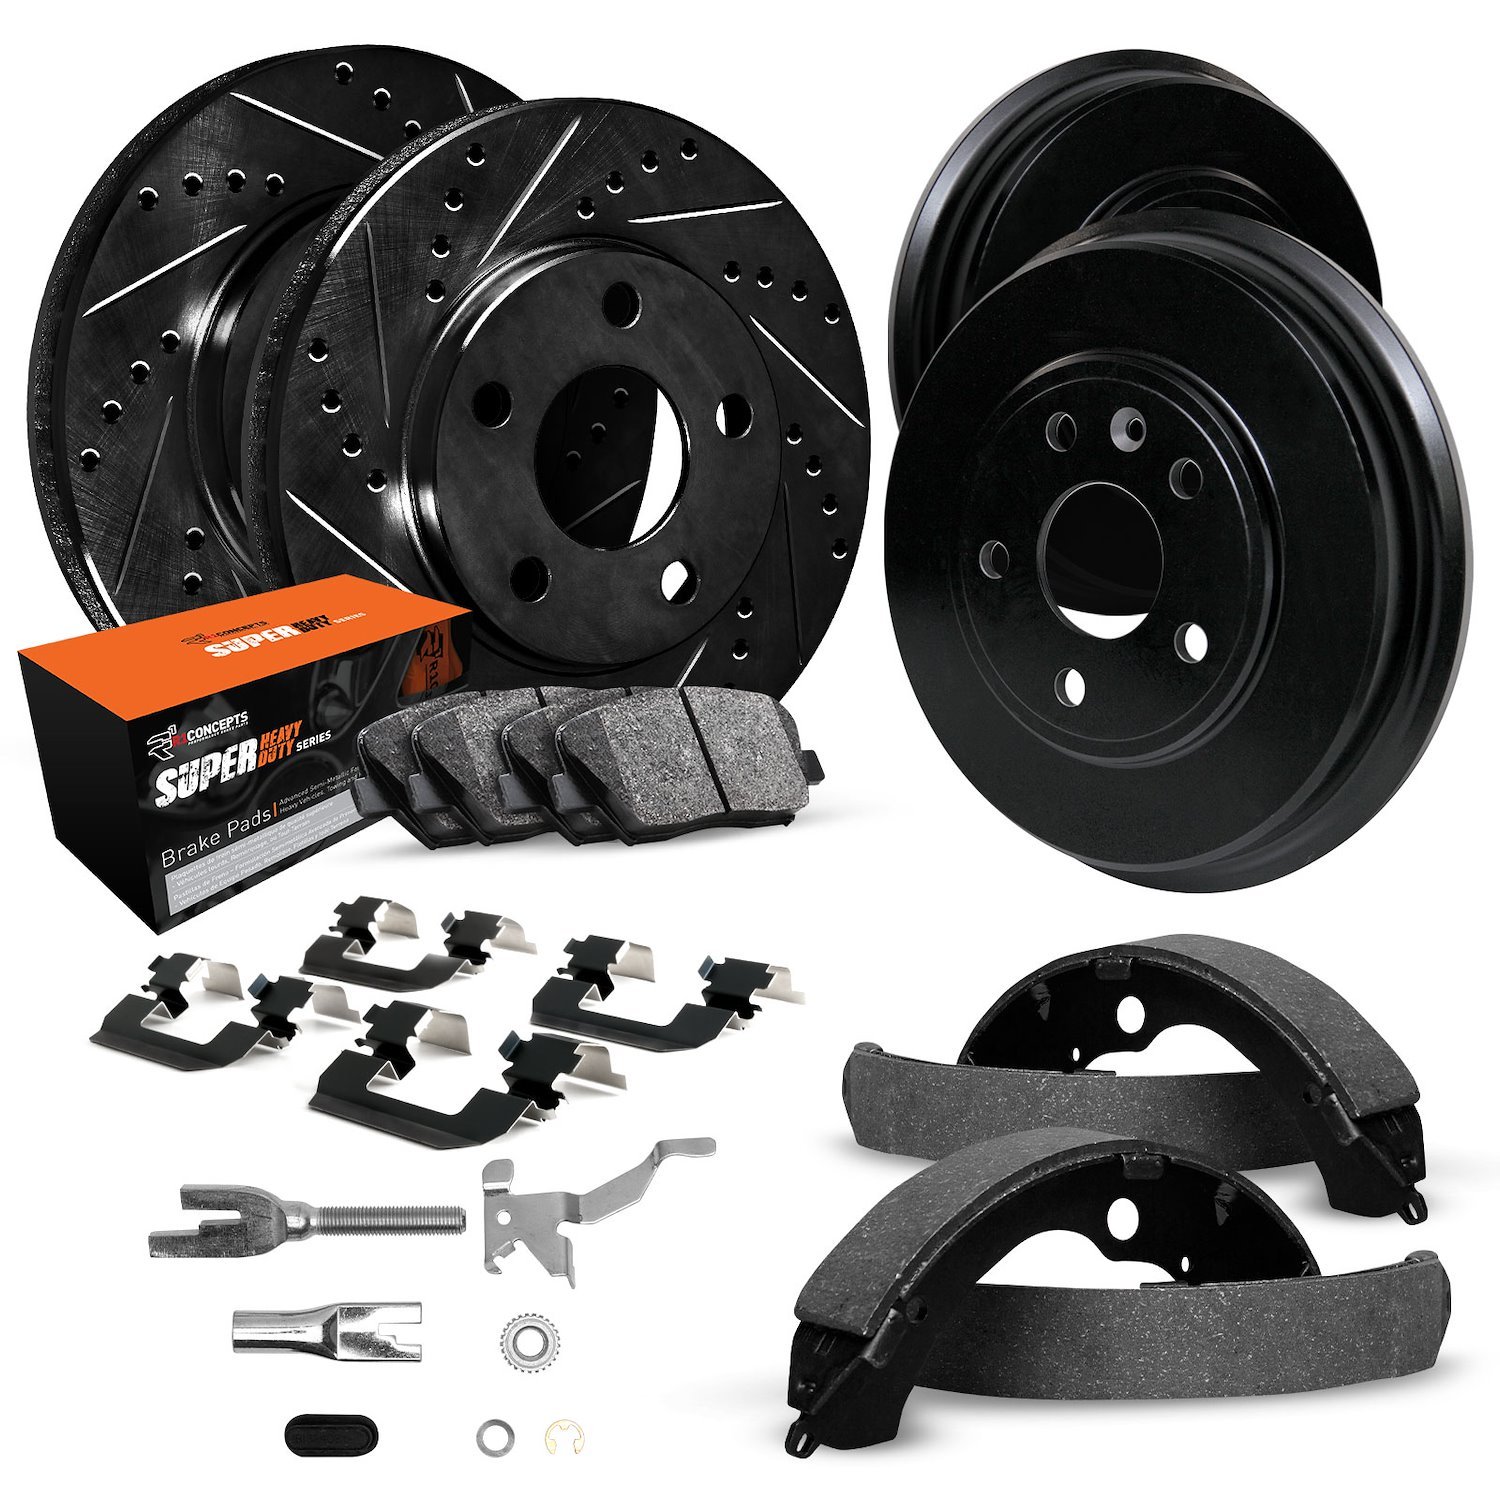 E-Line Drilled/Slotted Black Rotor & Drum Set w/Super-Duty Pads, Shoes, Hardware/Adjusters, 1998-2000 GM